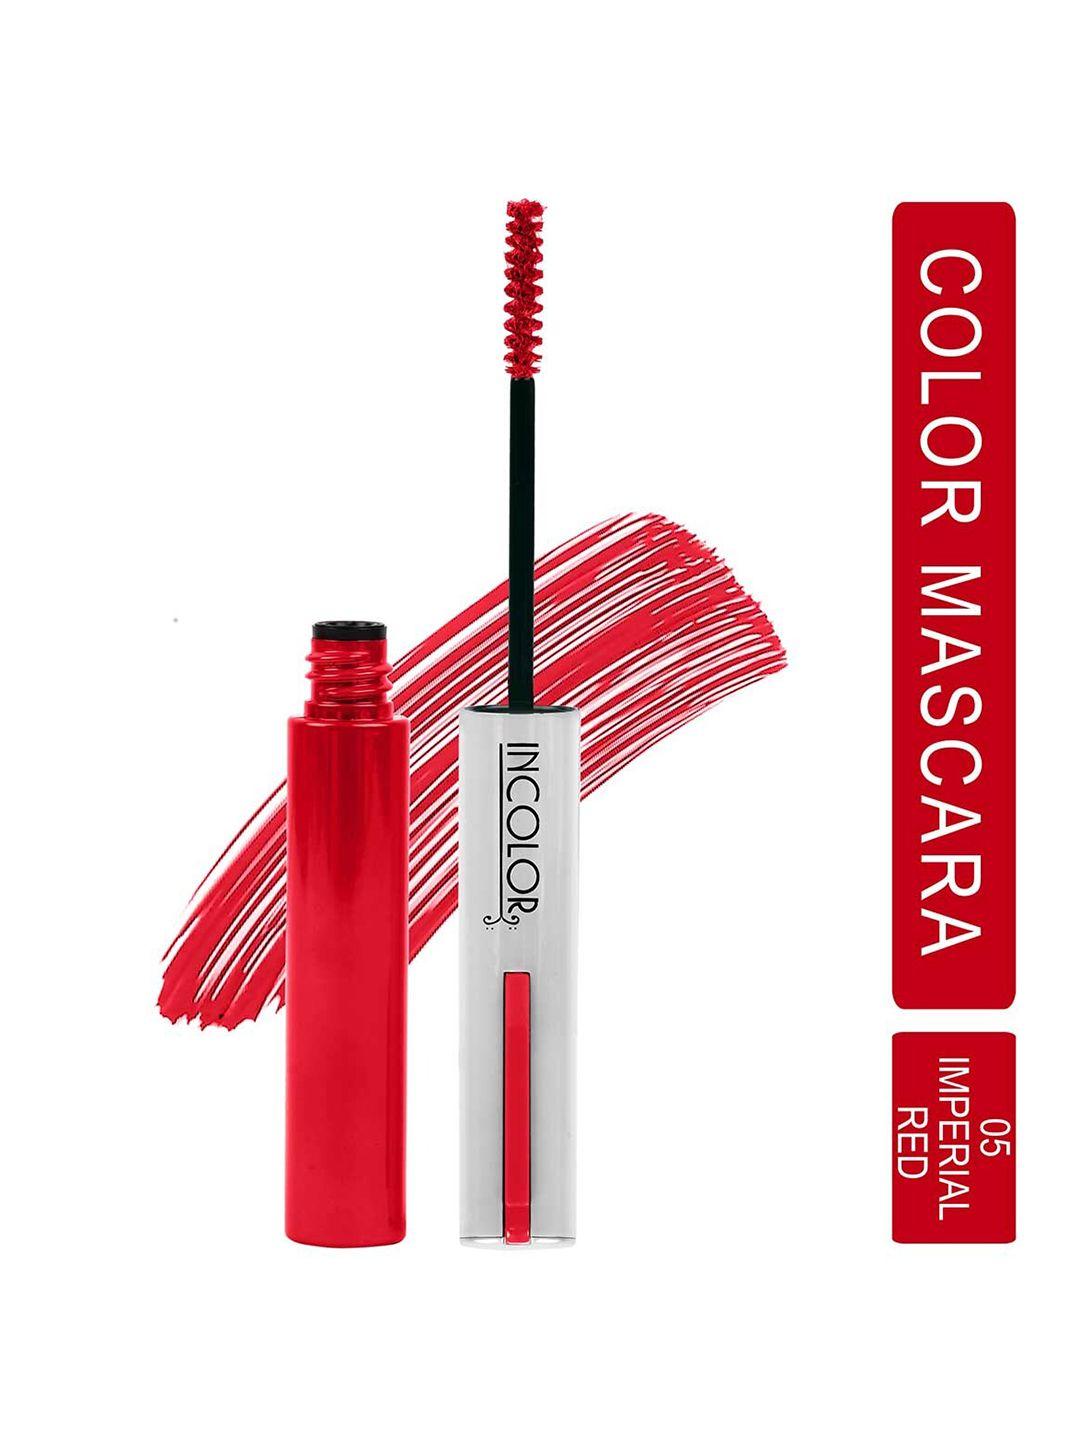 incolor-eye-makeup-long-lasting-color-mascara-6-ml---imperial-red-05